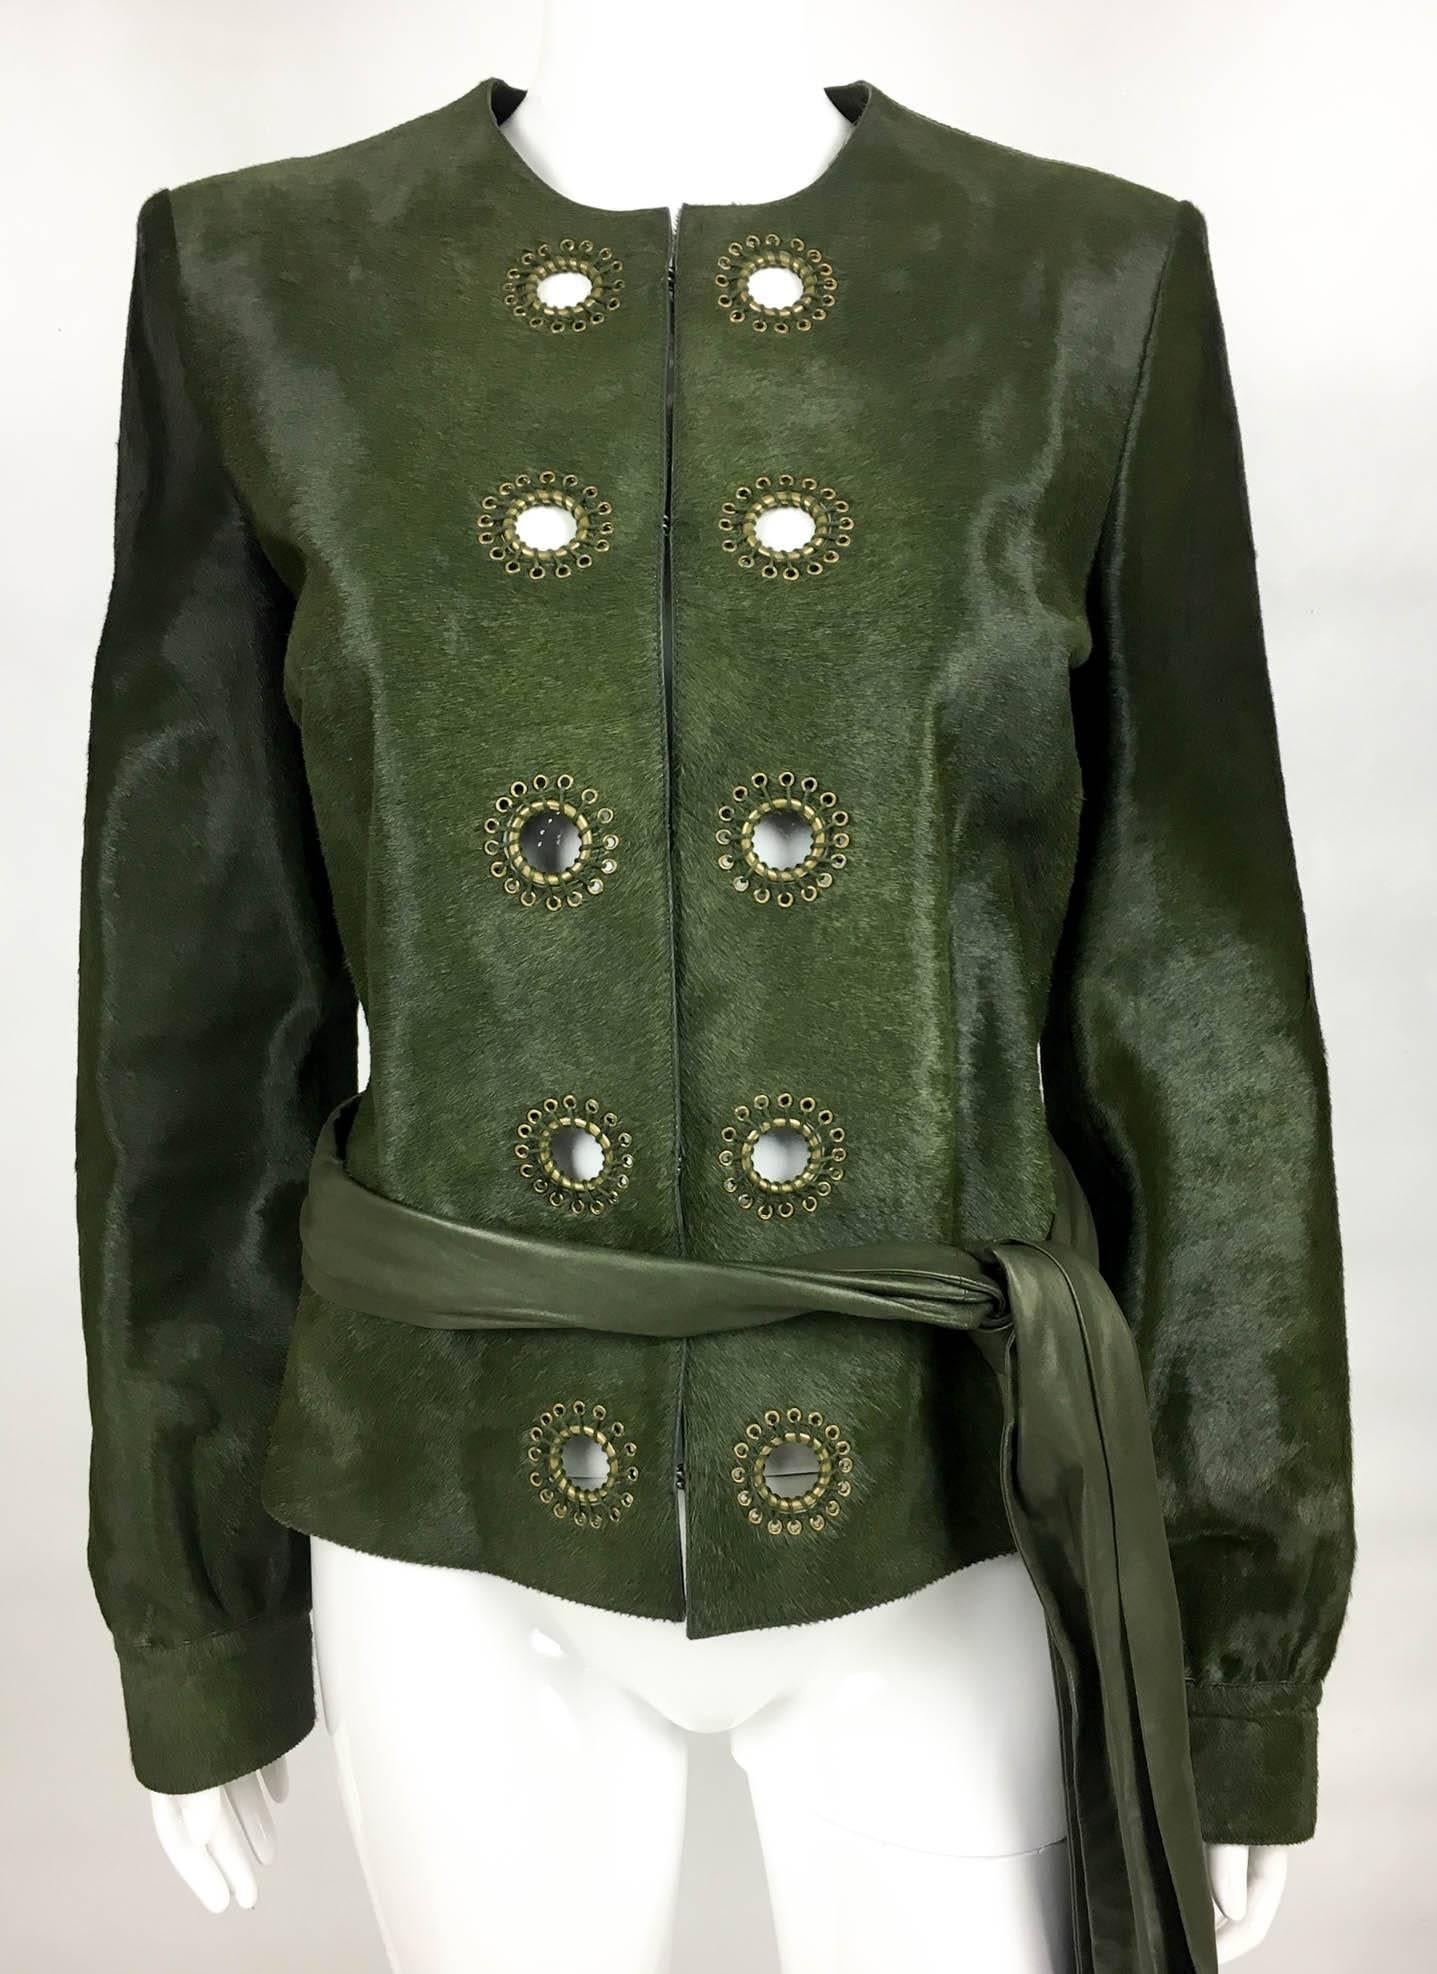 Yves Saint Laurent Moss Green Ponyskin Jacket With Eyelets - 2010s In New Condition In London, Chelsea